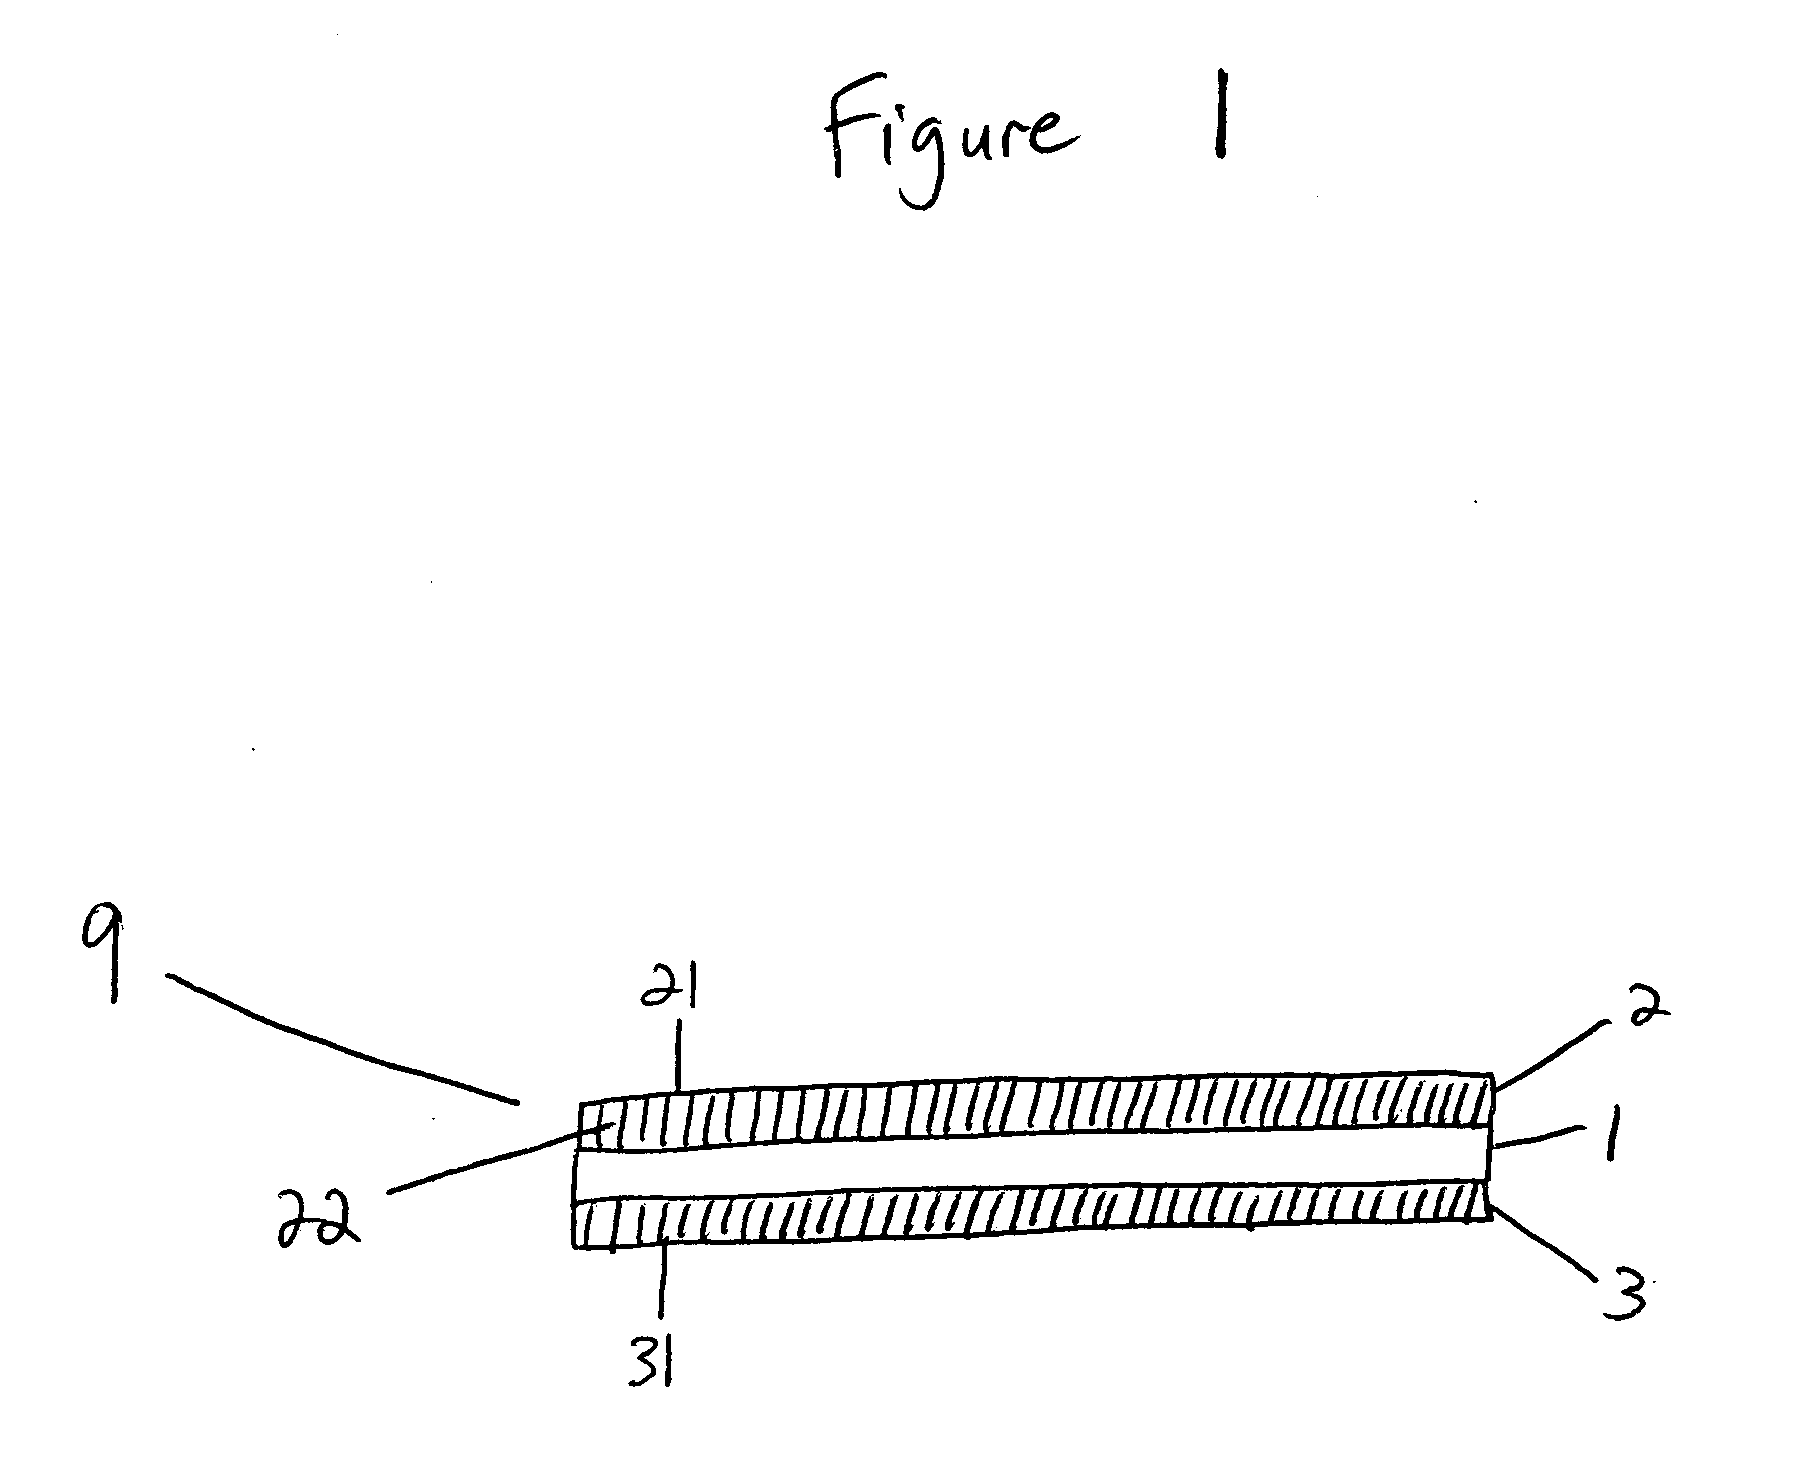 Electrochemical fuel cell component materials and methods of bonding electrochemical fuel cell components